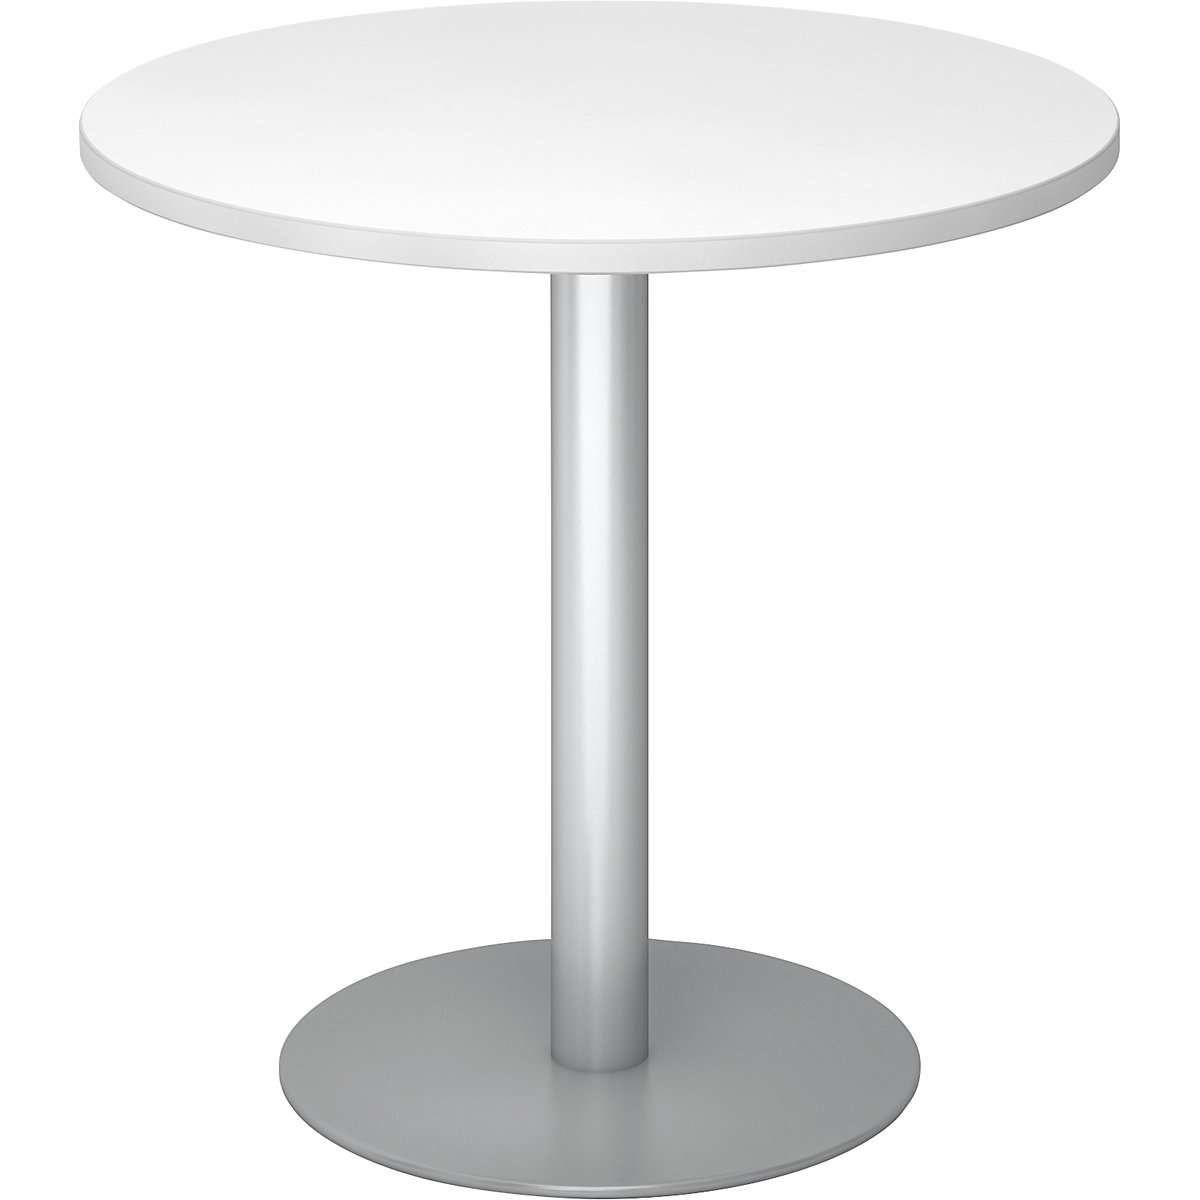 Conference table, Ø 800 mm, 755 mm high, silver frame, tabletop in white-7